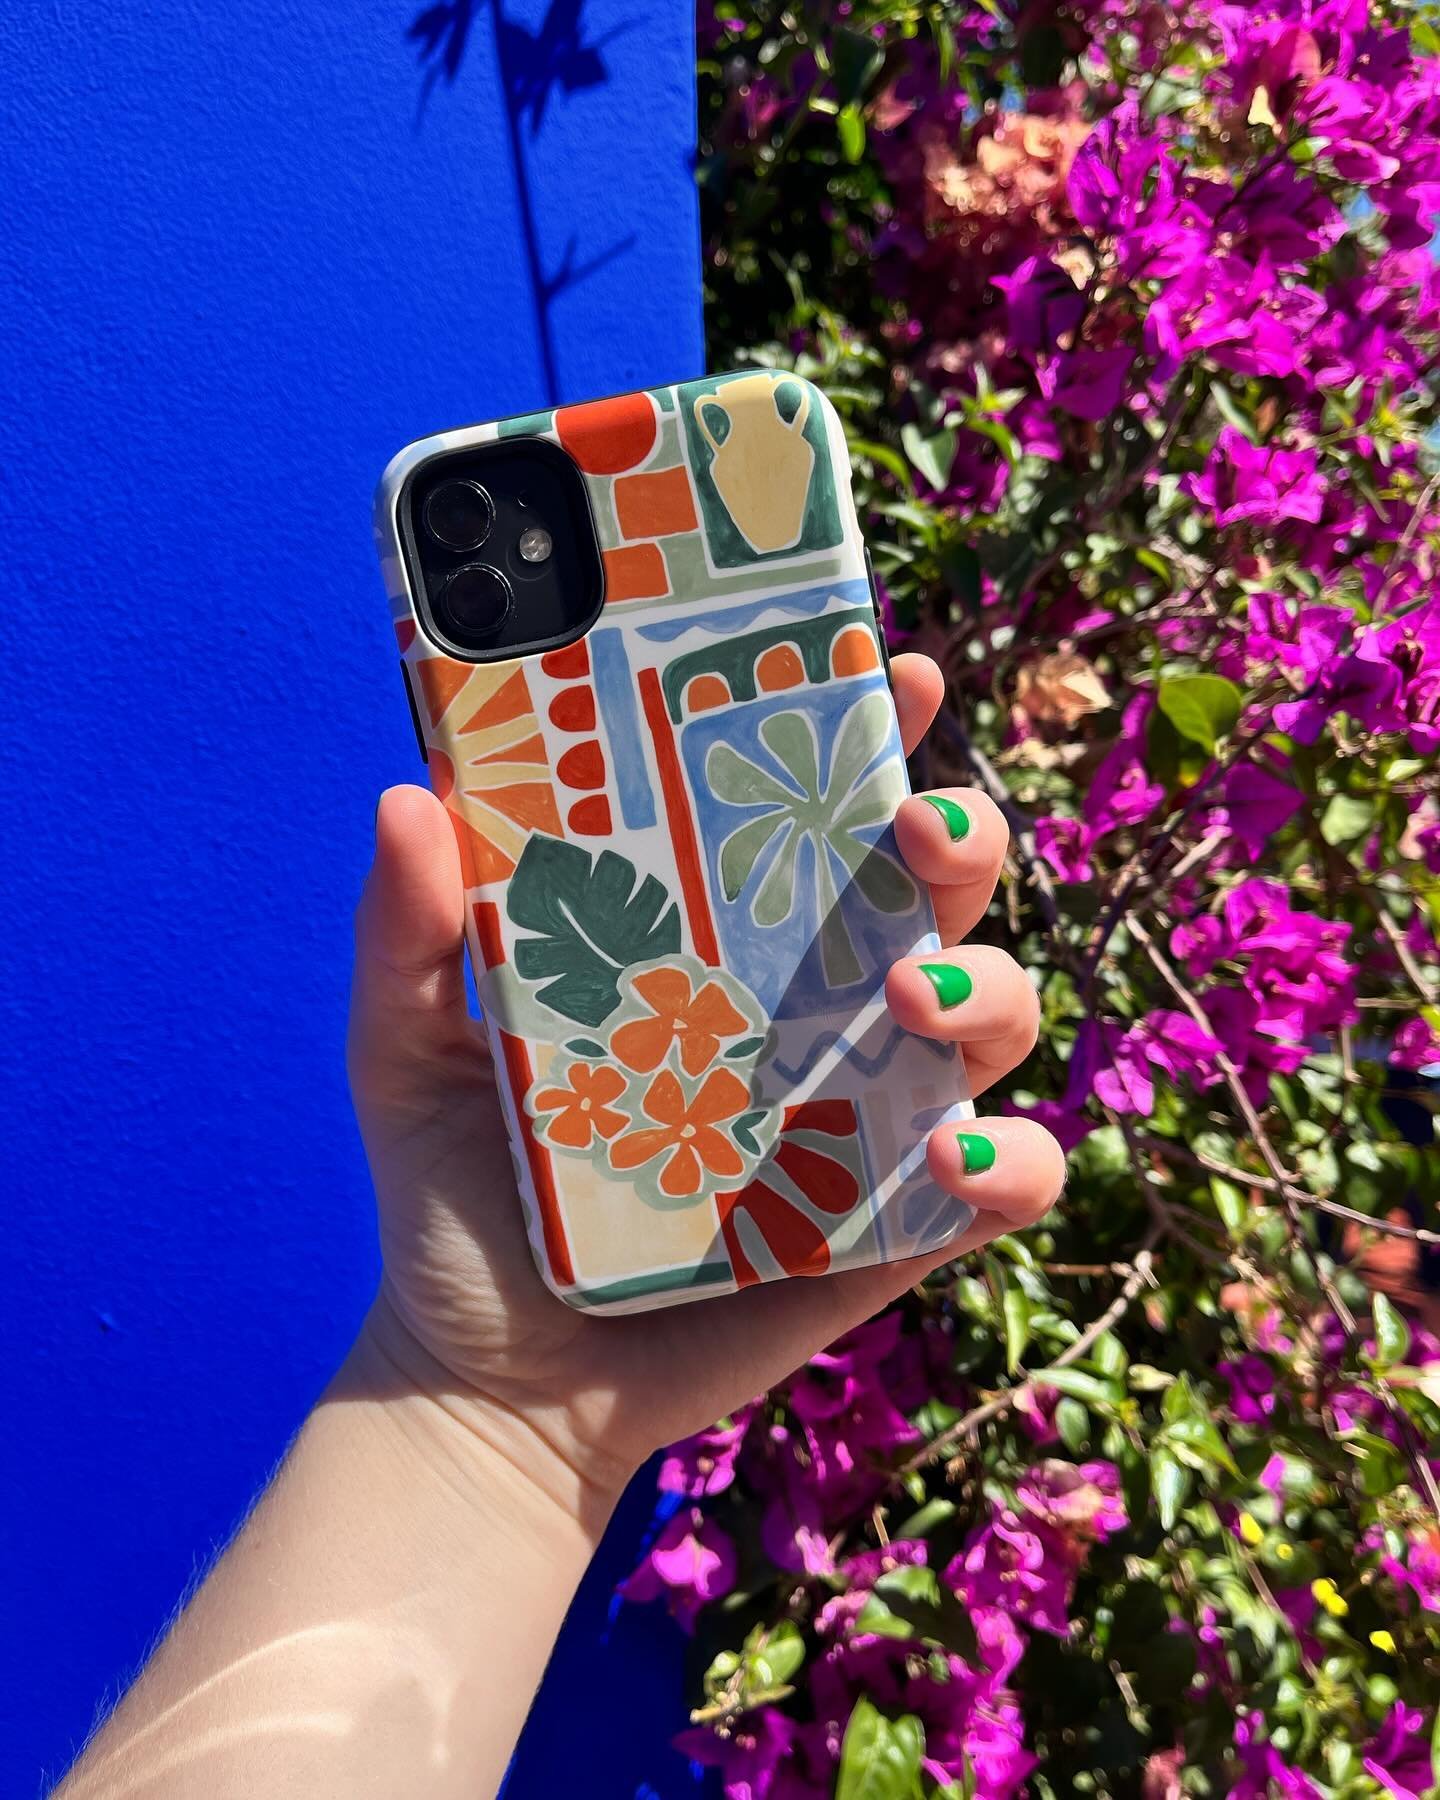 My &lsquo;Tropicana Tile&rsquo; phone case on tour in Marrakesh, seems the perfect setting for the summery feels 🌝

Available at @thedairy 💙
.
.
.
#customphonecase #phoneaccessory #patterndesigner #thedairy